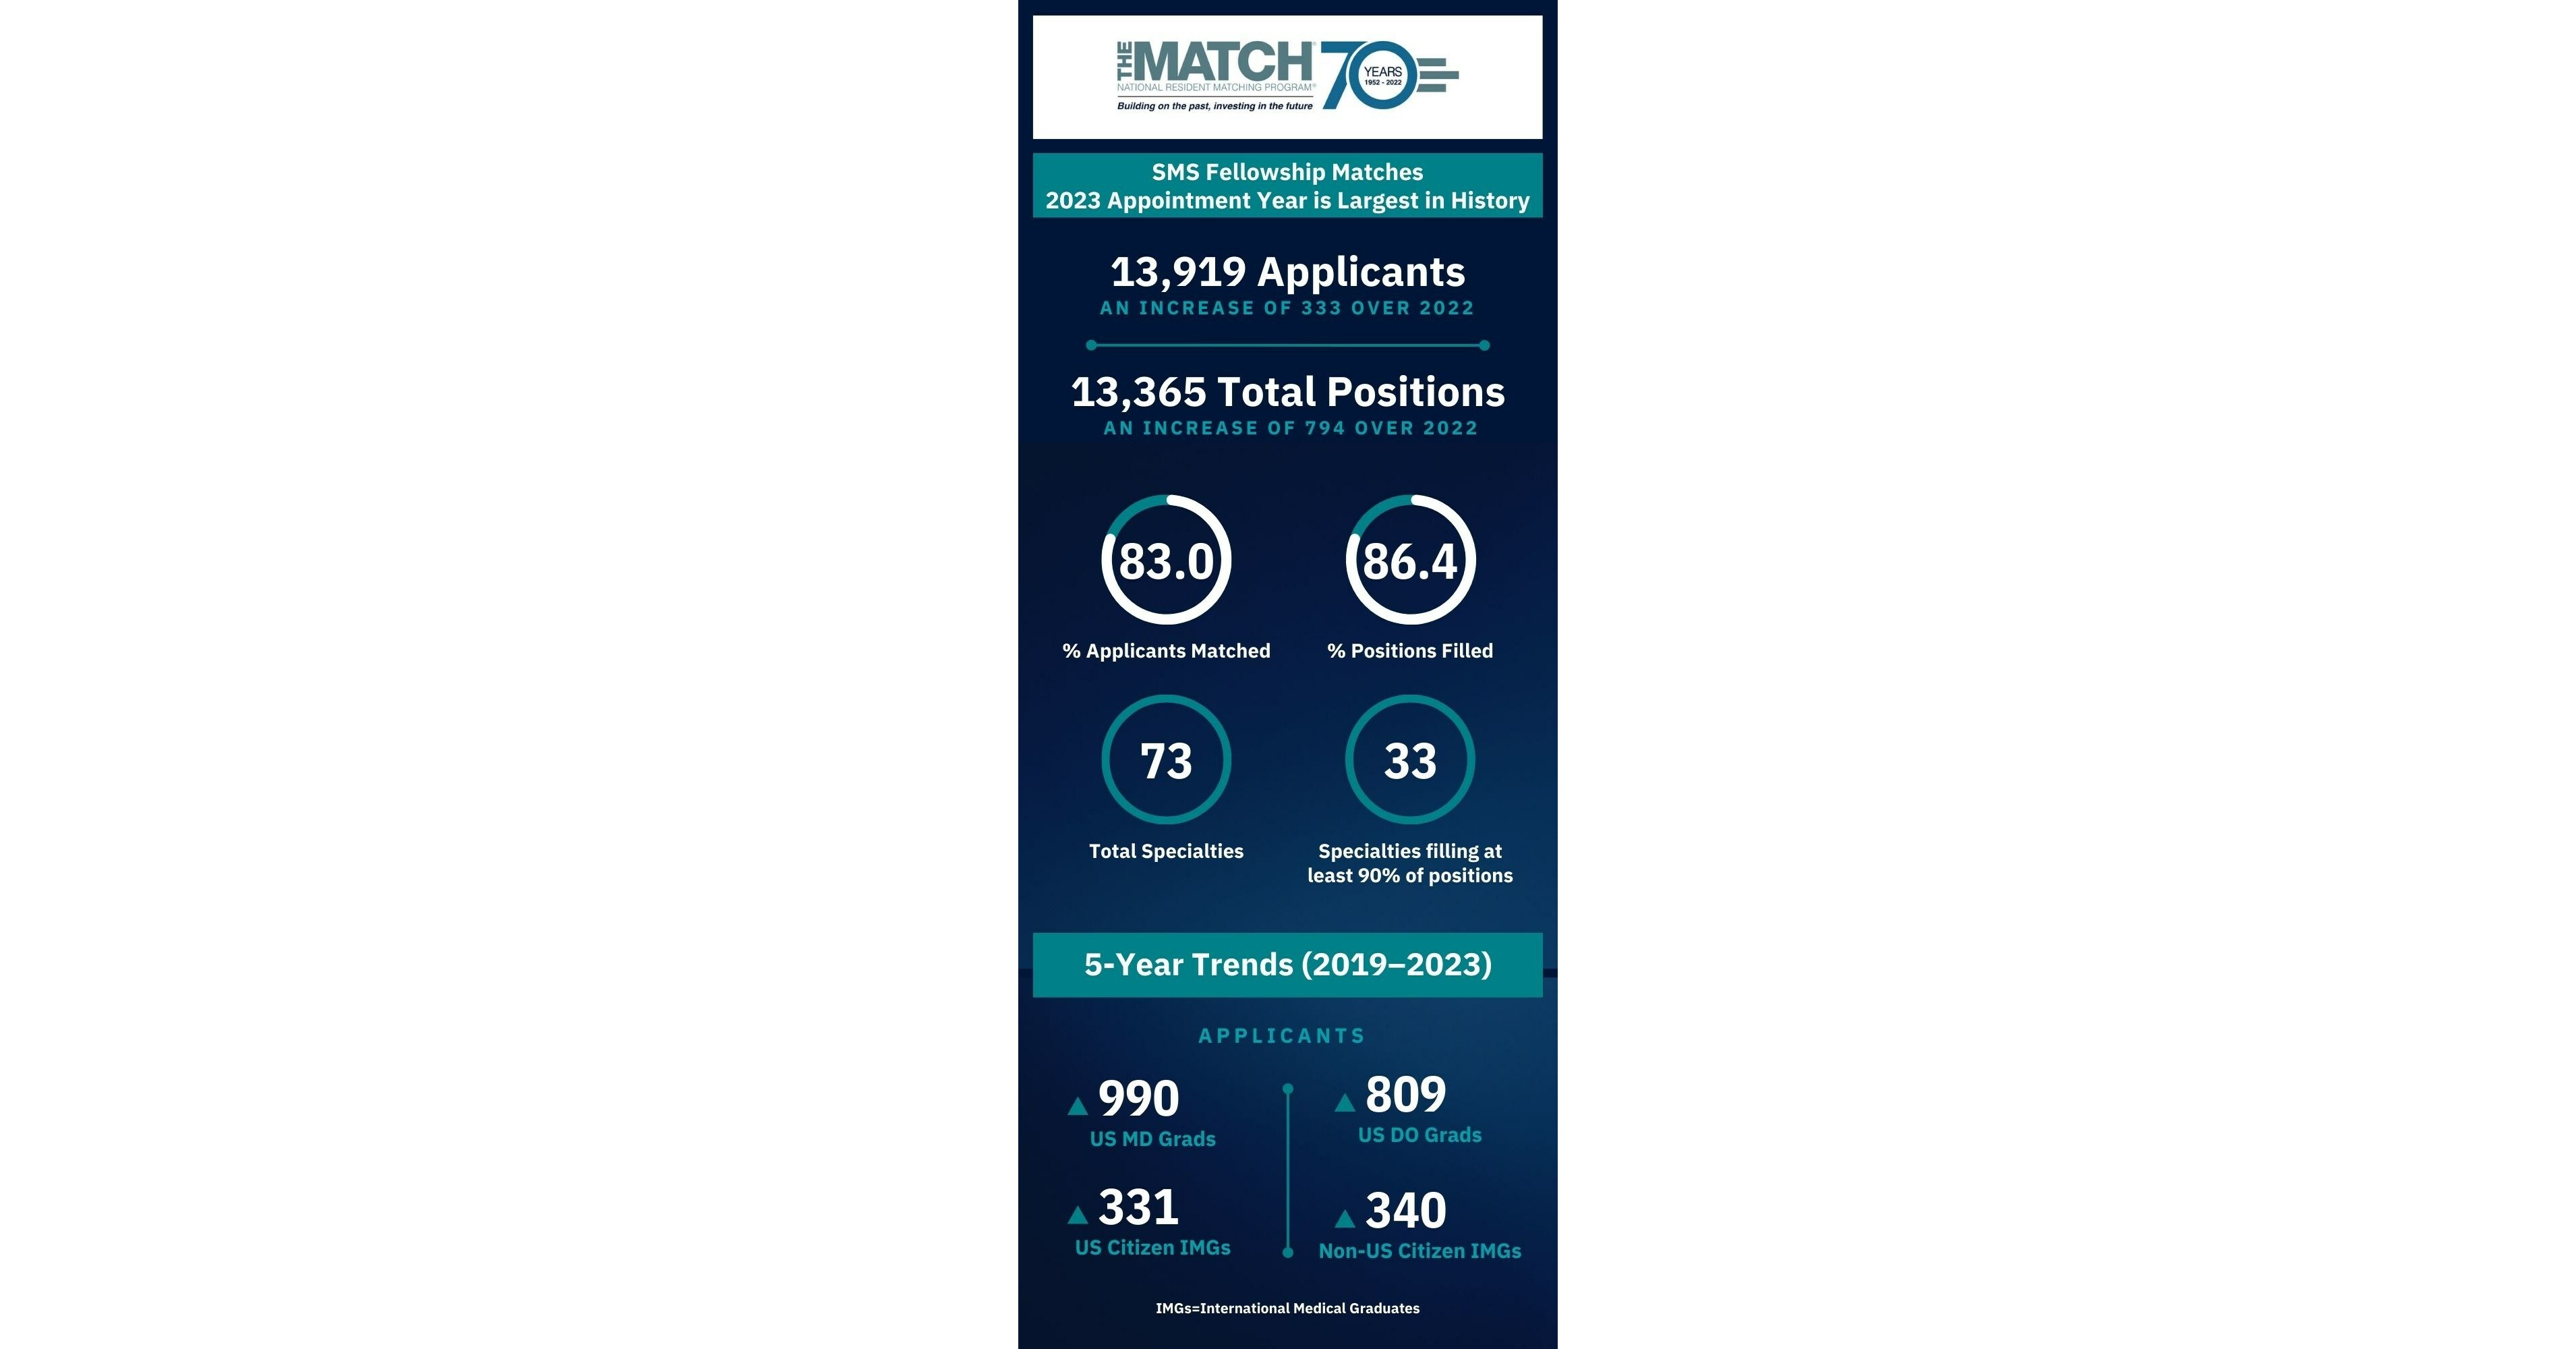 NRMP® Publishes Comprehensive Data Book for Fellowship Matches